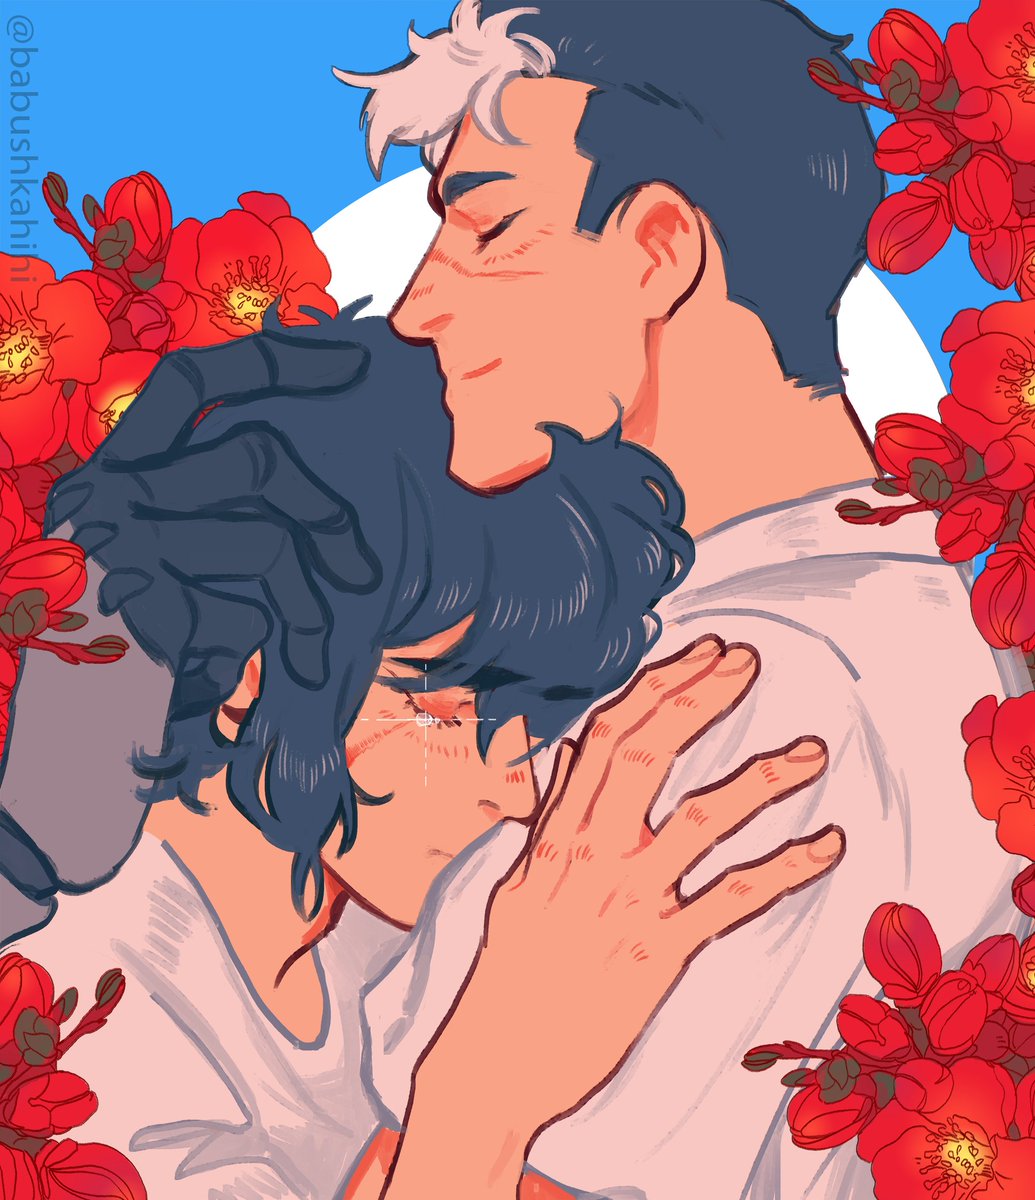 Say that everything will be fine. Even if it's a lie.
#sheith